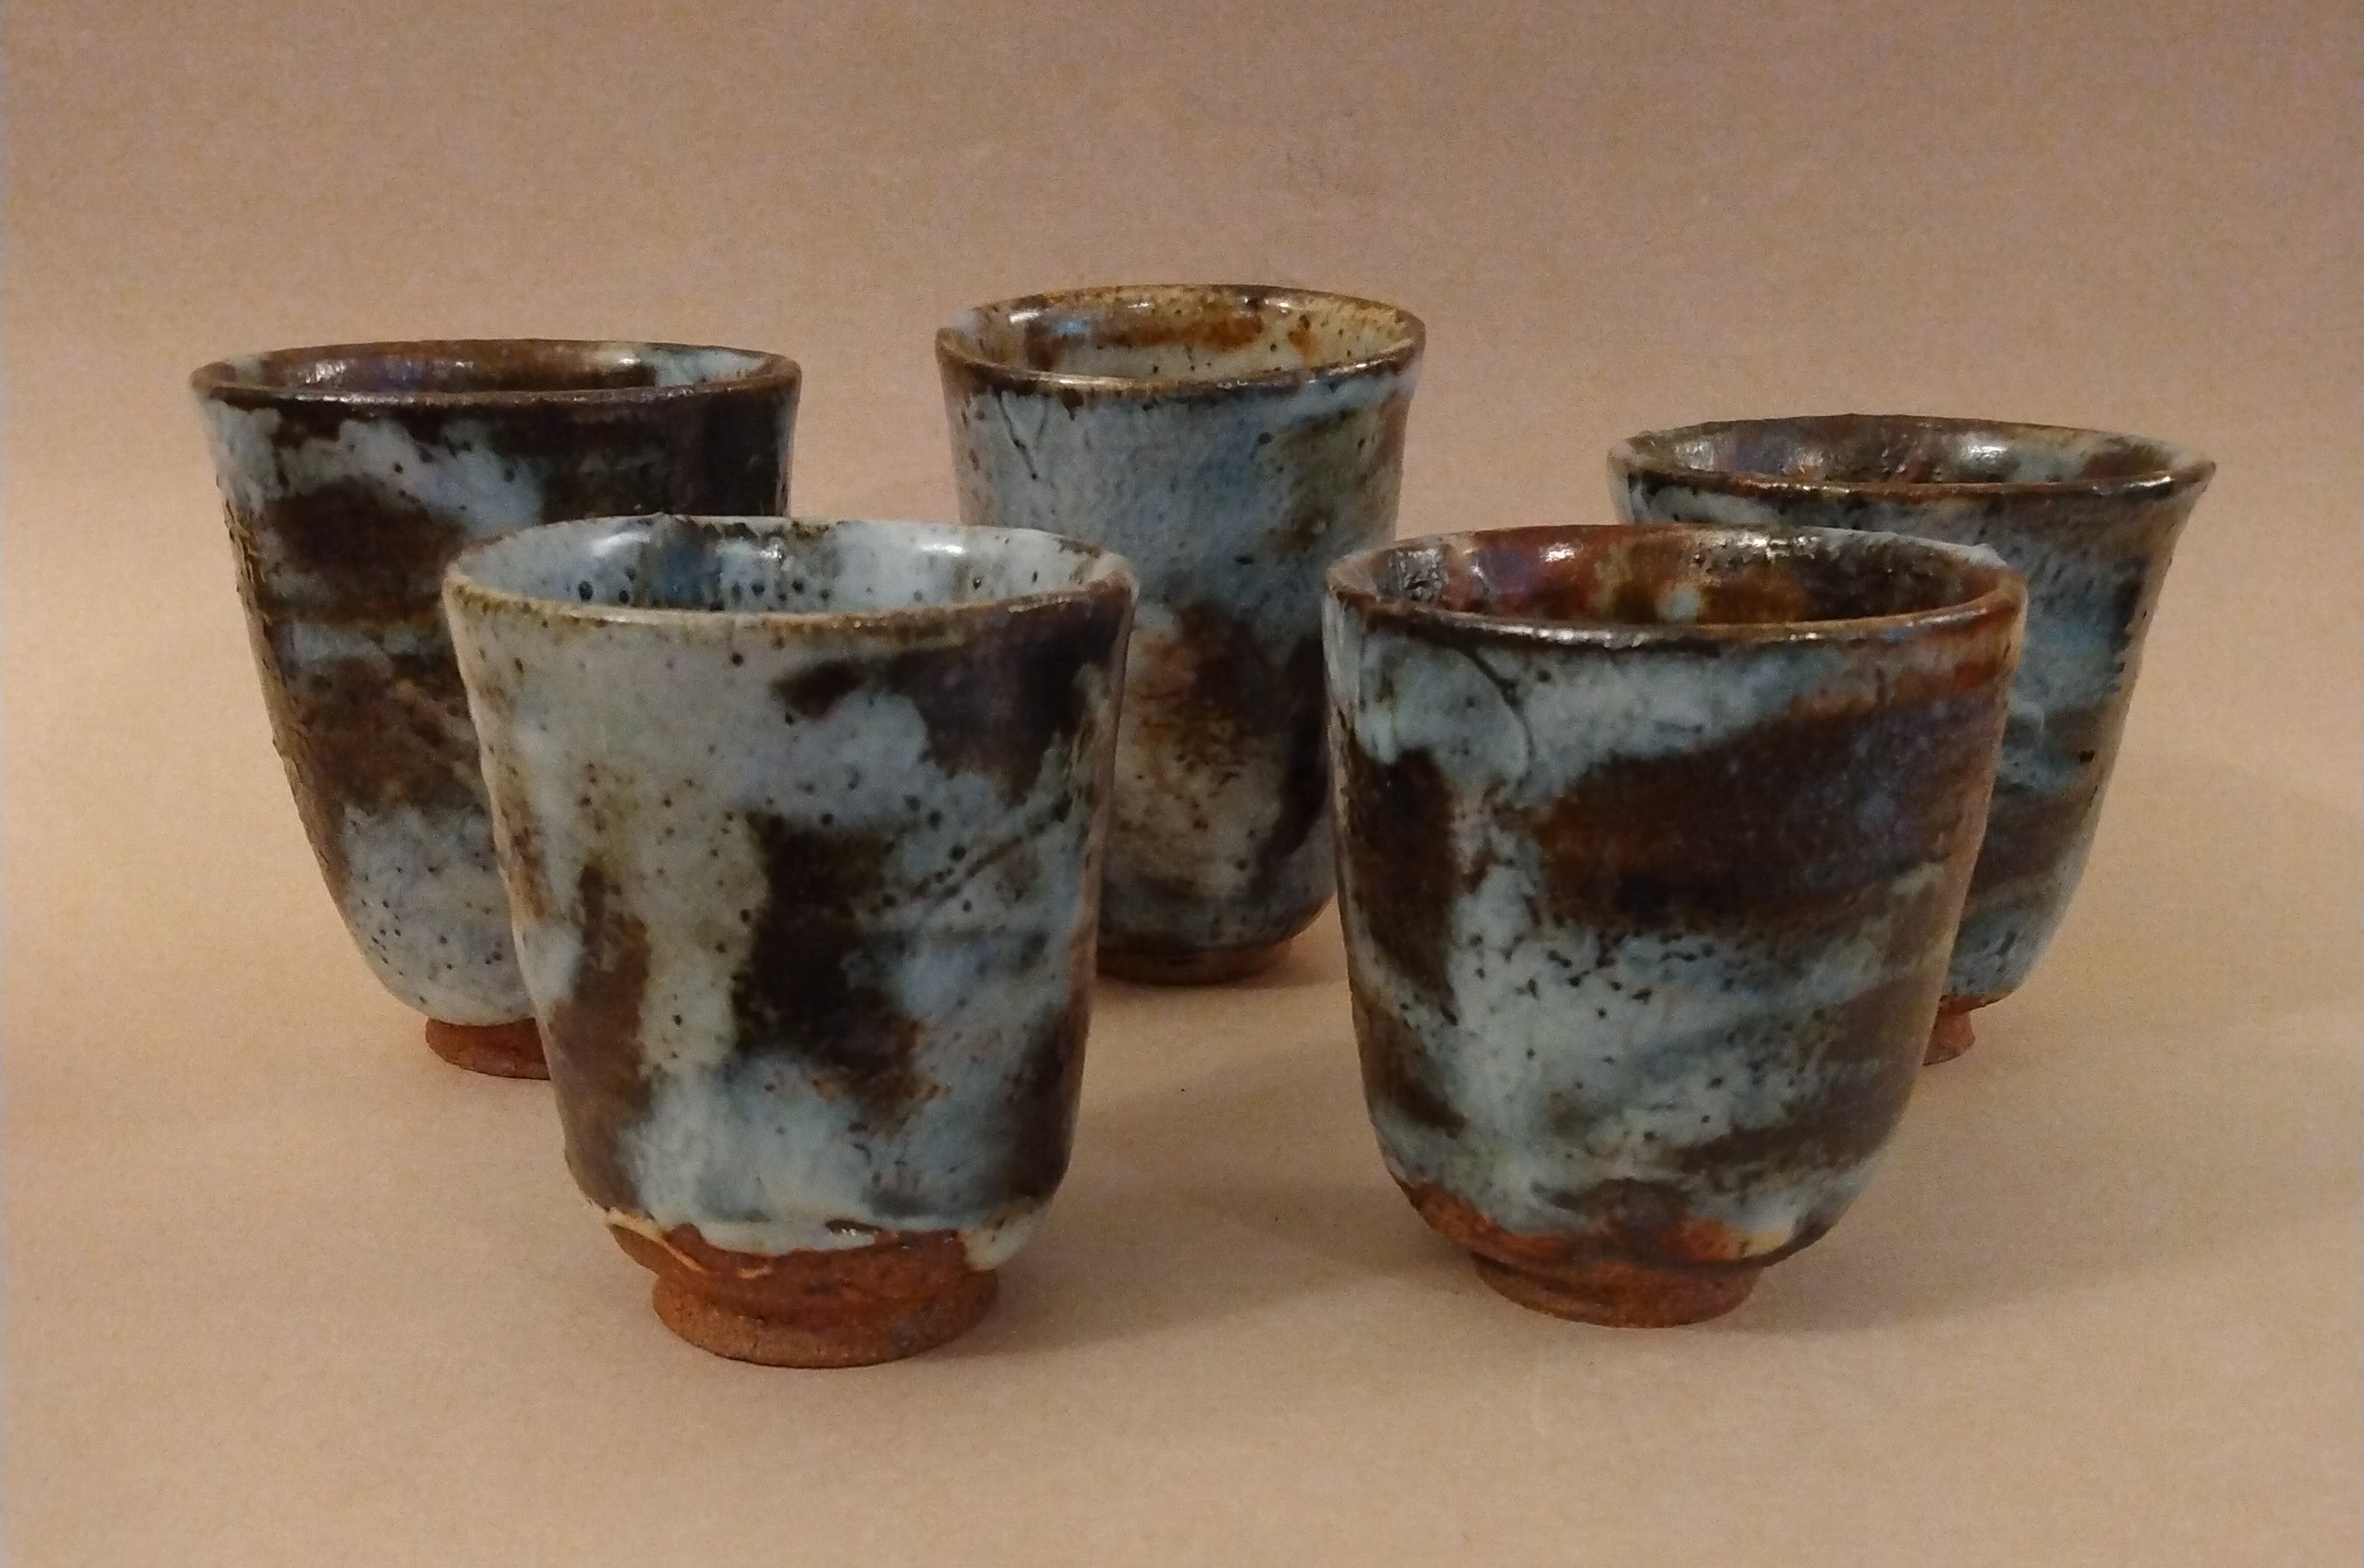 20% donated to Maui Wildfire Relief - Sake, Whiskey, or Tea Cups (set of 5, or individual) by Sachiko Furuya